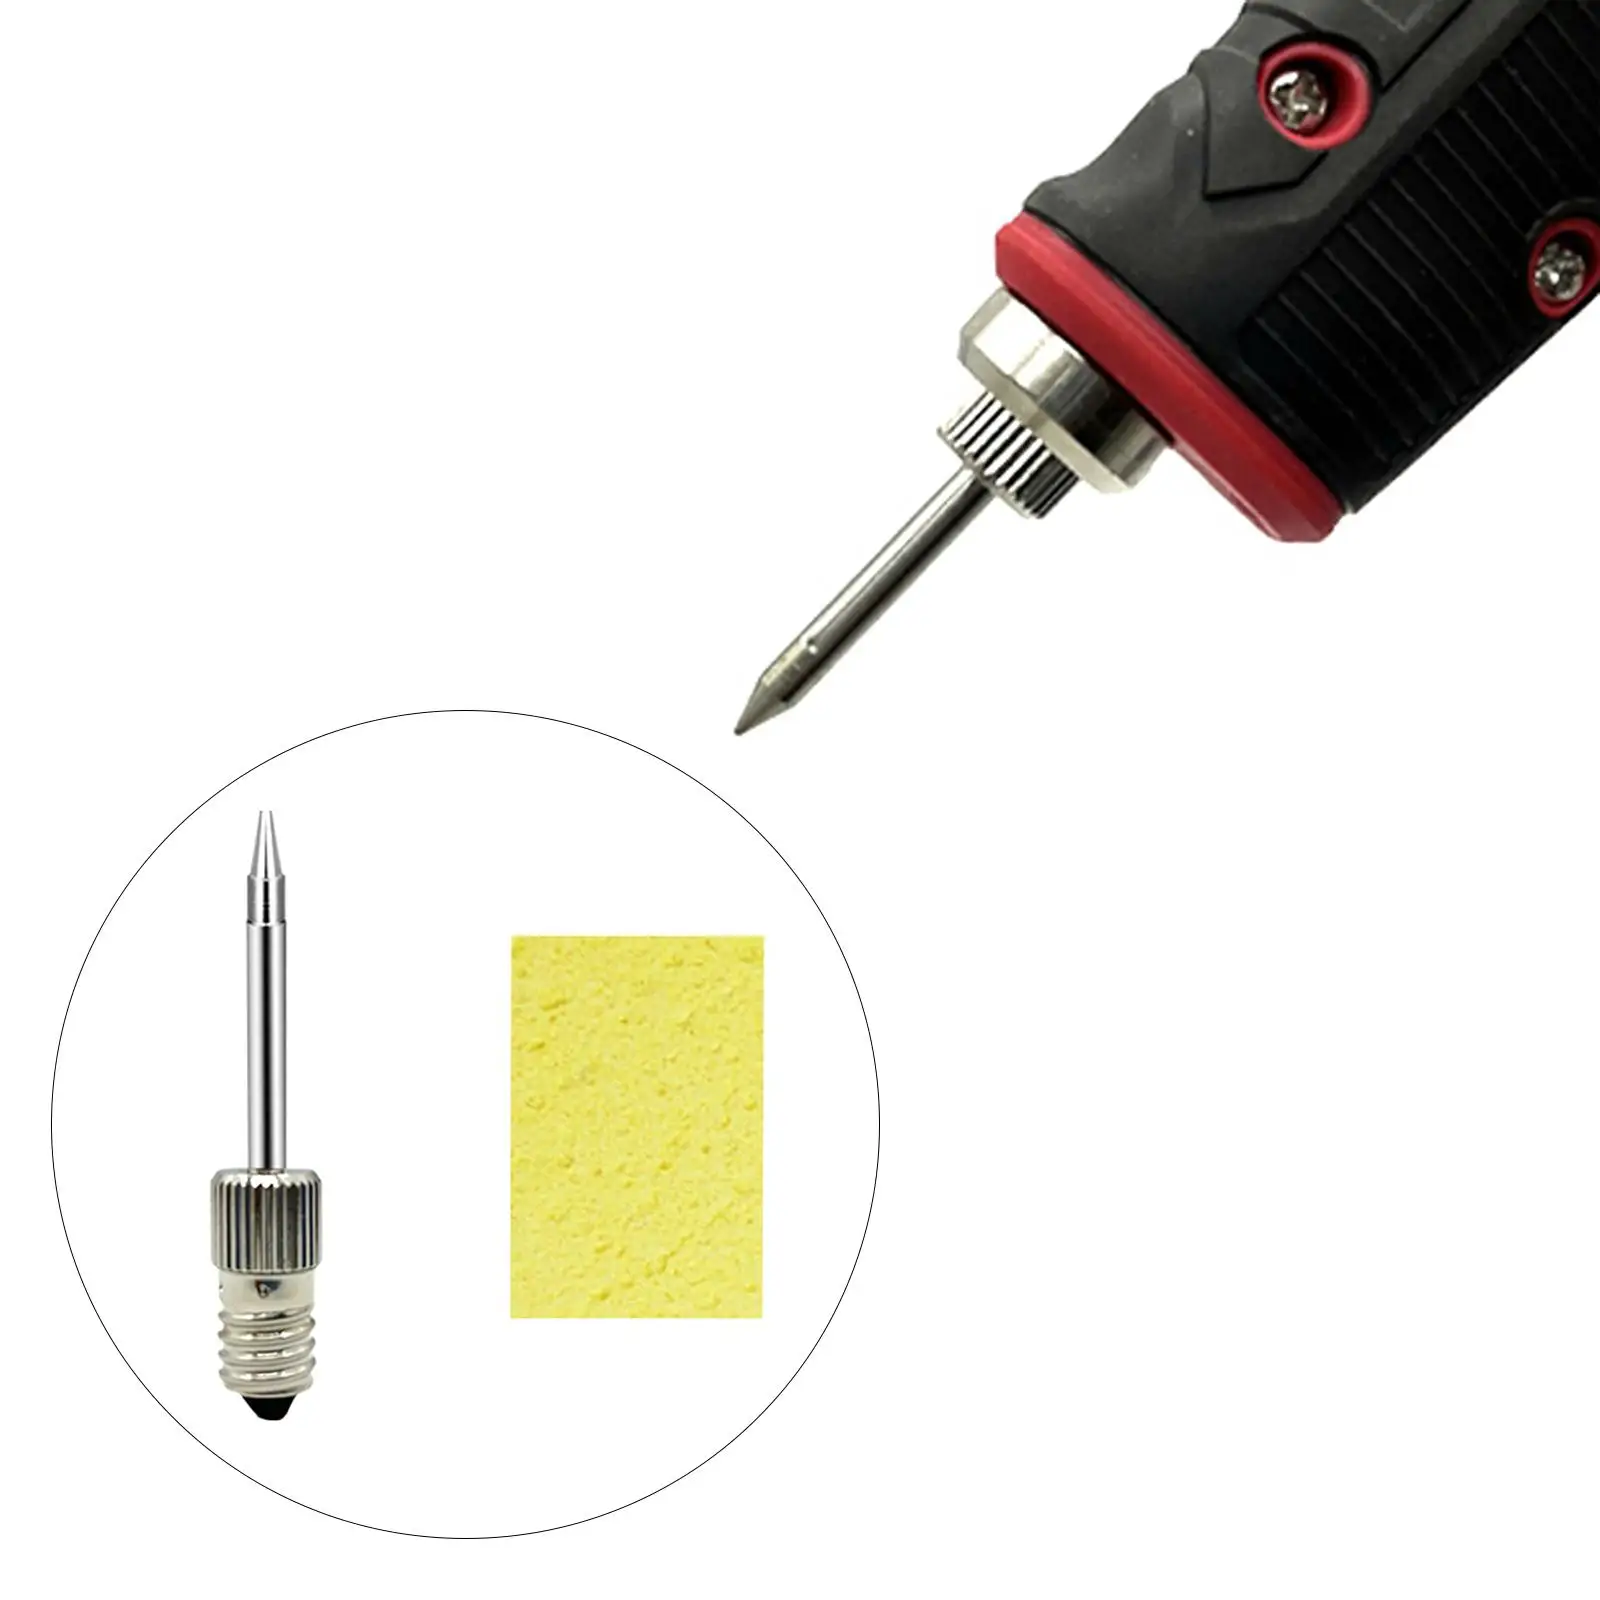 Soldering Tip Solder Welding Replacements Tip Kits for E10 Interface Soldering Replacement with Cleaning Sponge